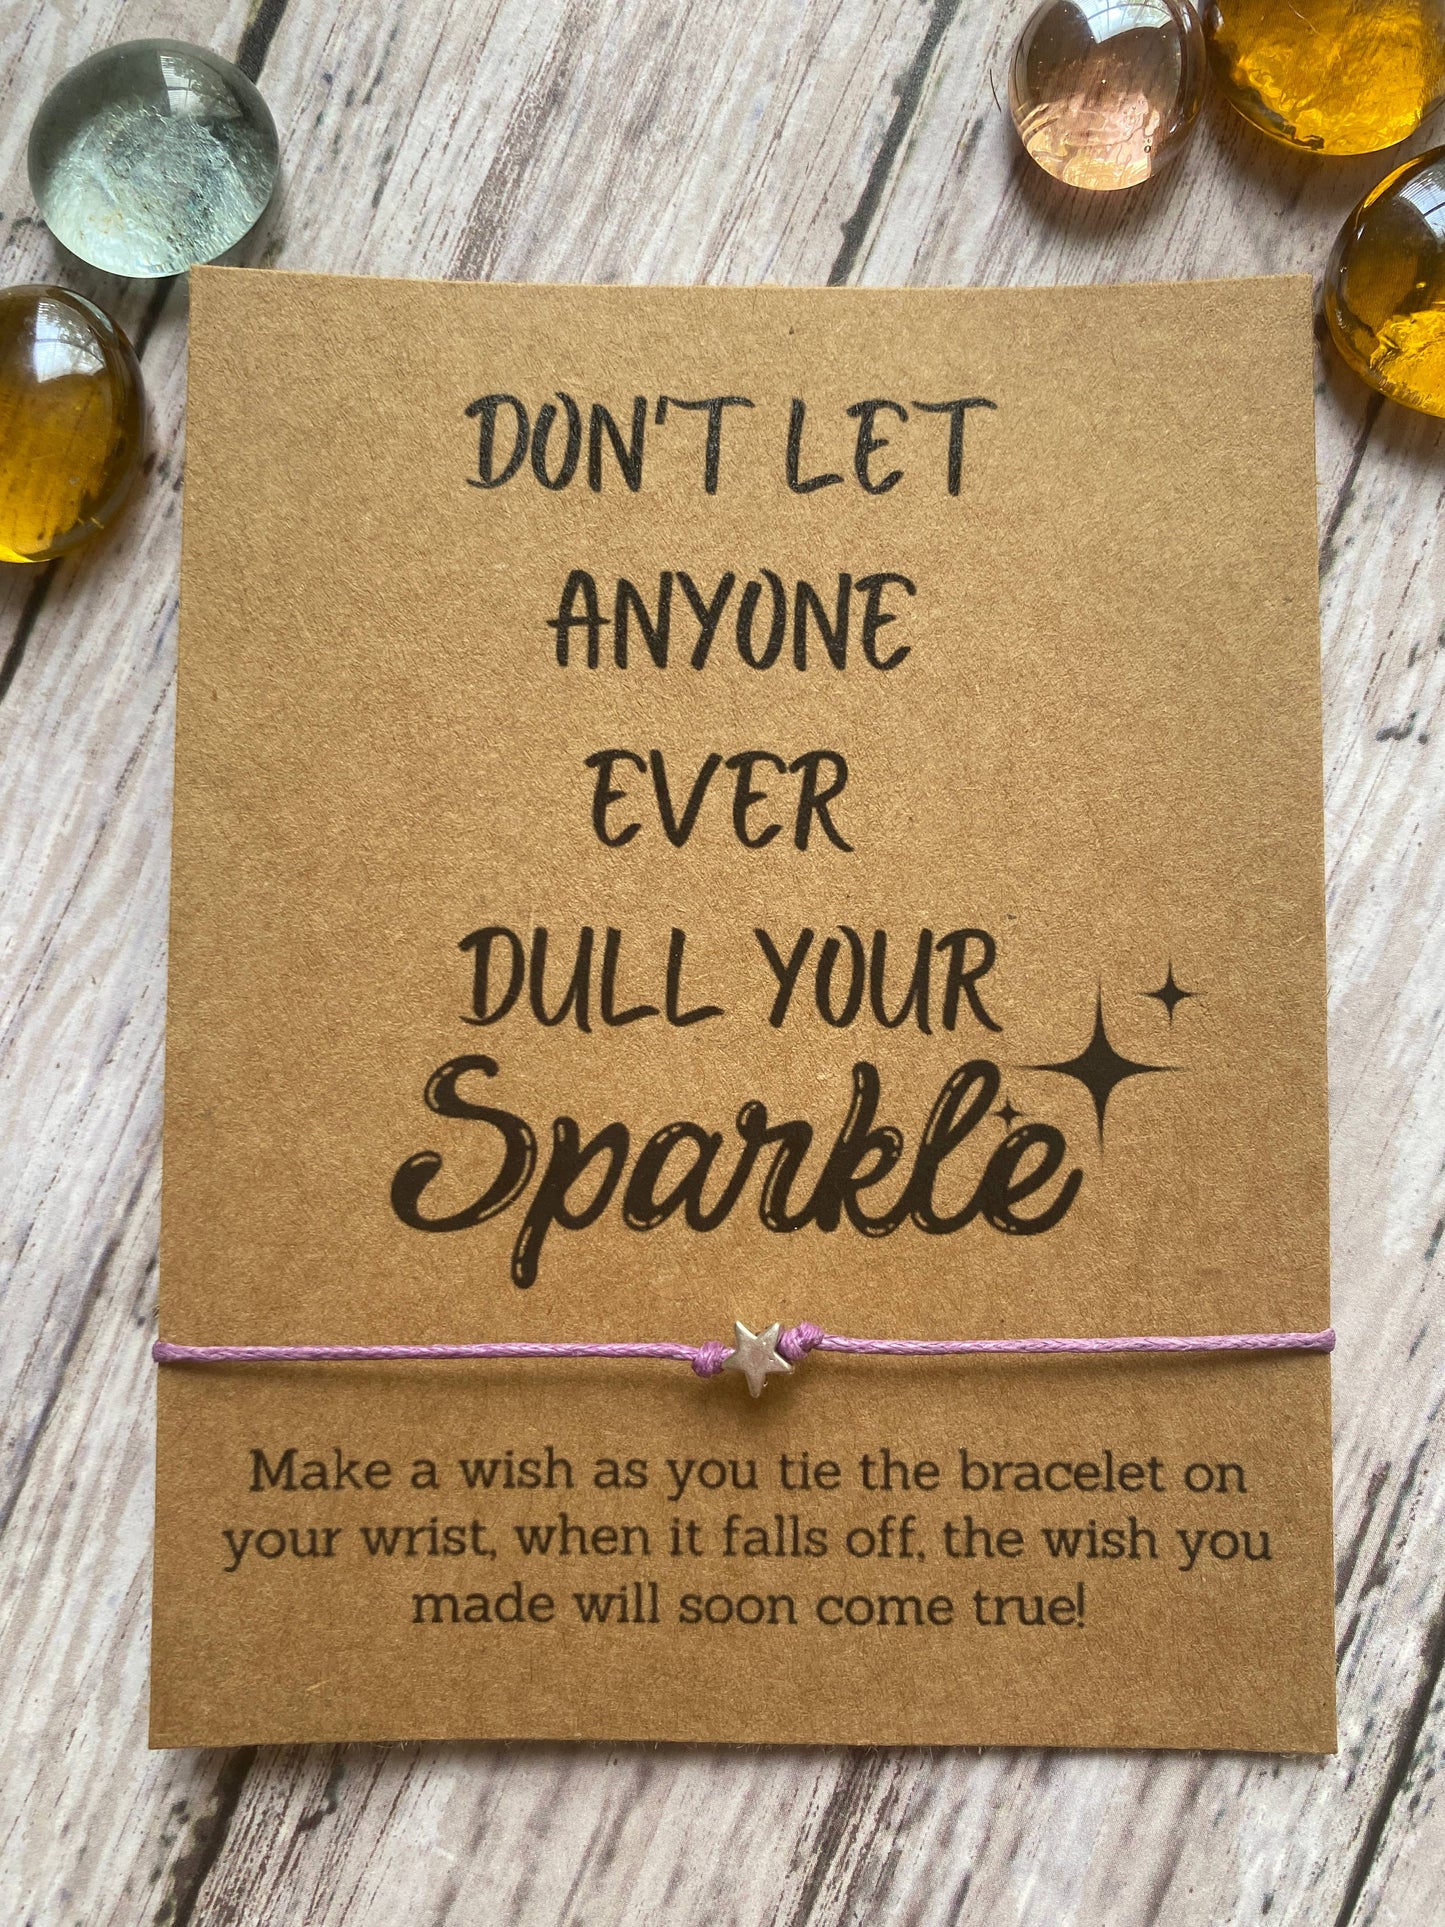 Don't let anyone ever dull your sparkle